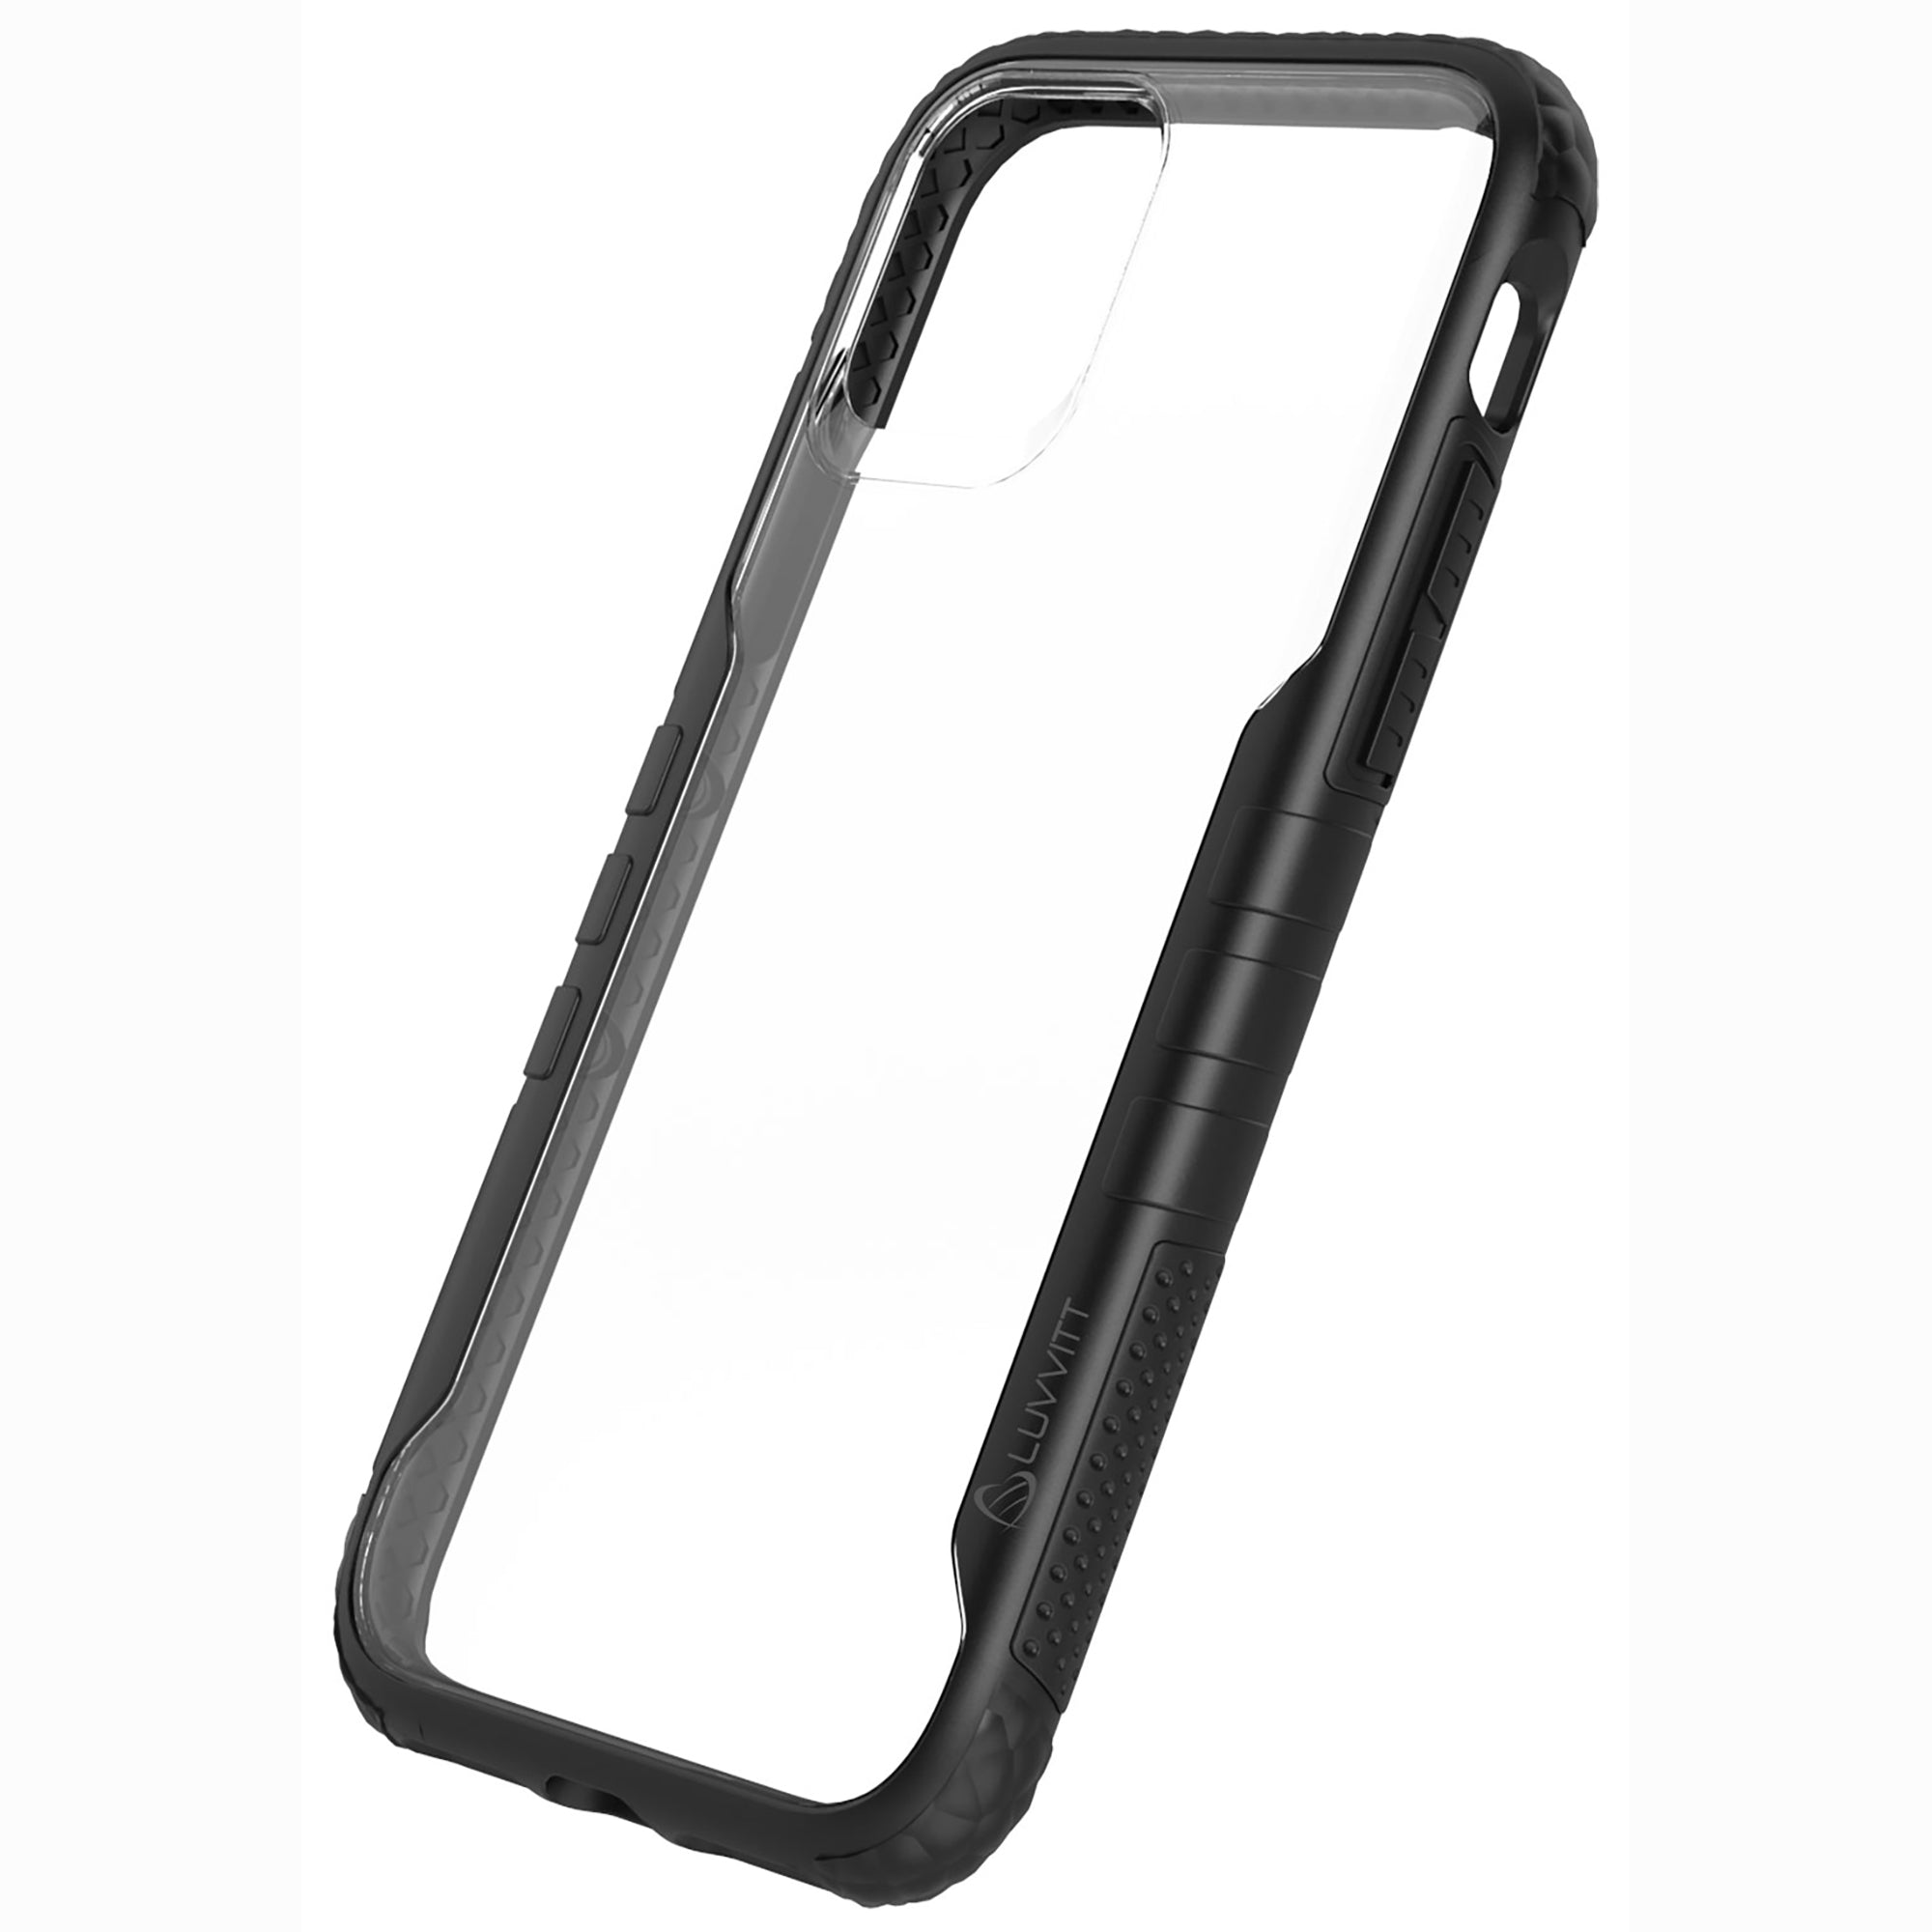 Luvvitt ProofTech Hybrid Case with AntiShock Protection for Apple iPhone 11 Pro Max 2019 - Black